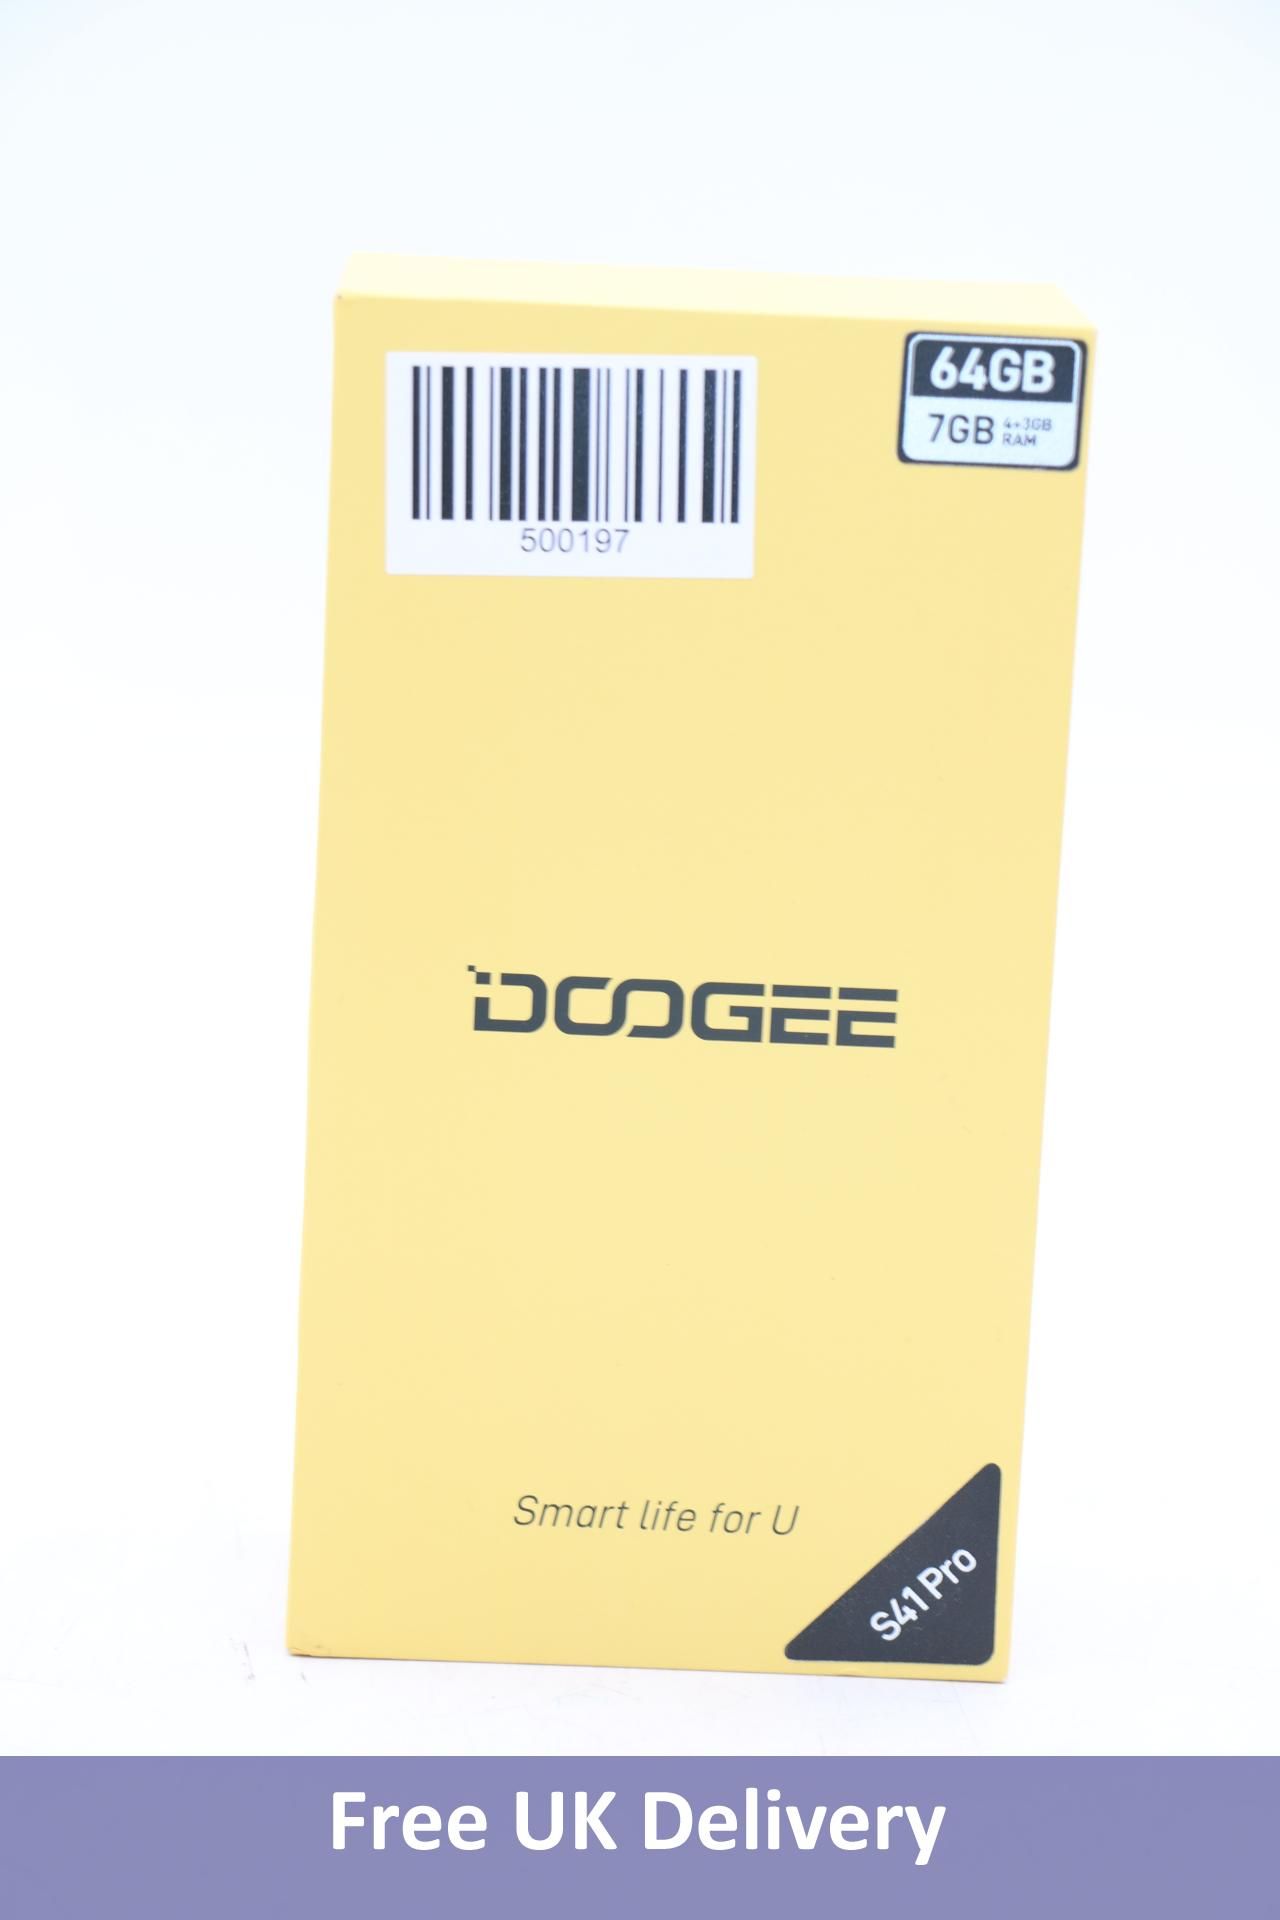 Doogee S41PRO Android Smartphone, 4GB + 3GB, 64GB, Volcano Orange. New, box opened. Checkmend clear,